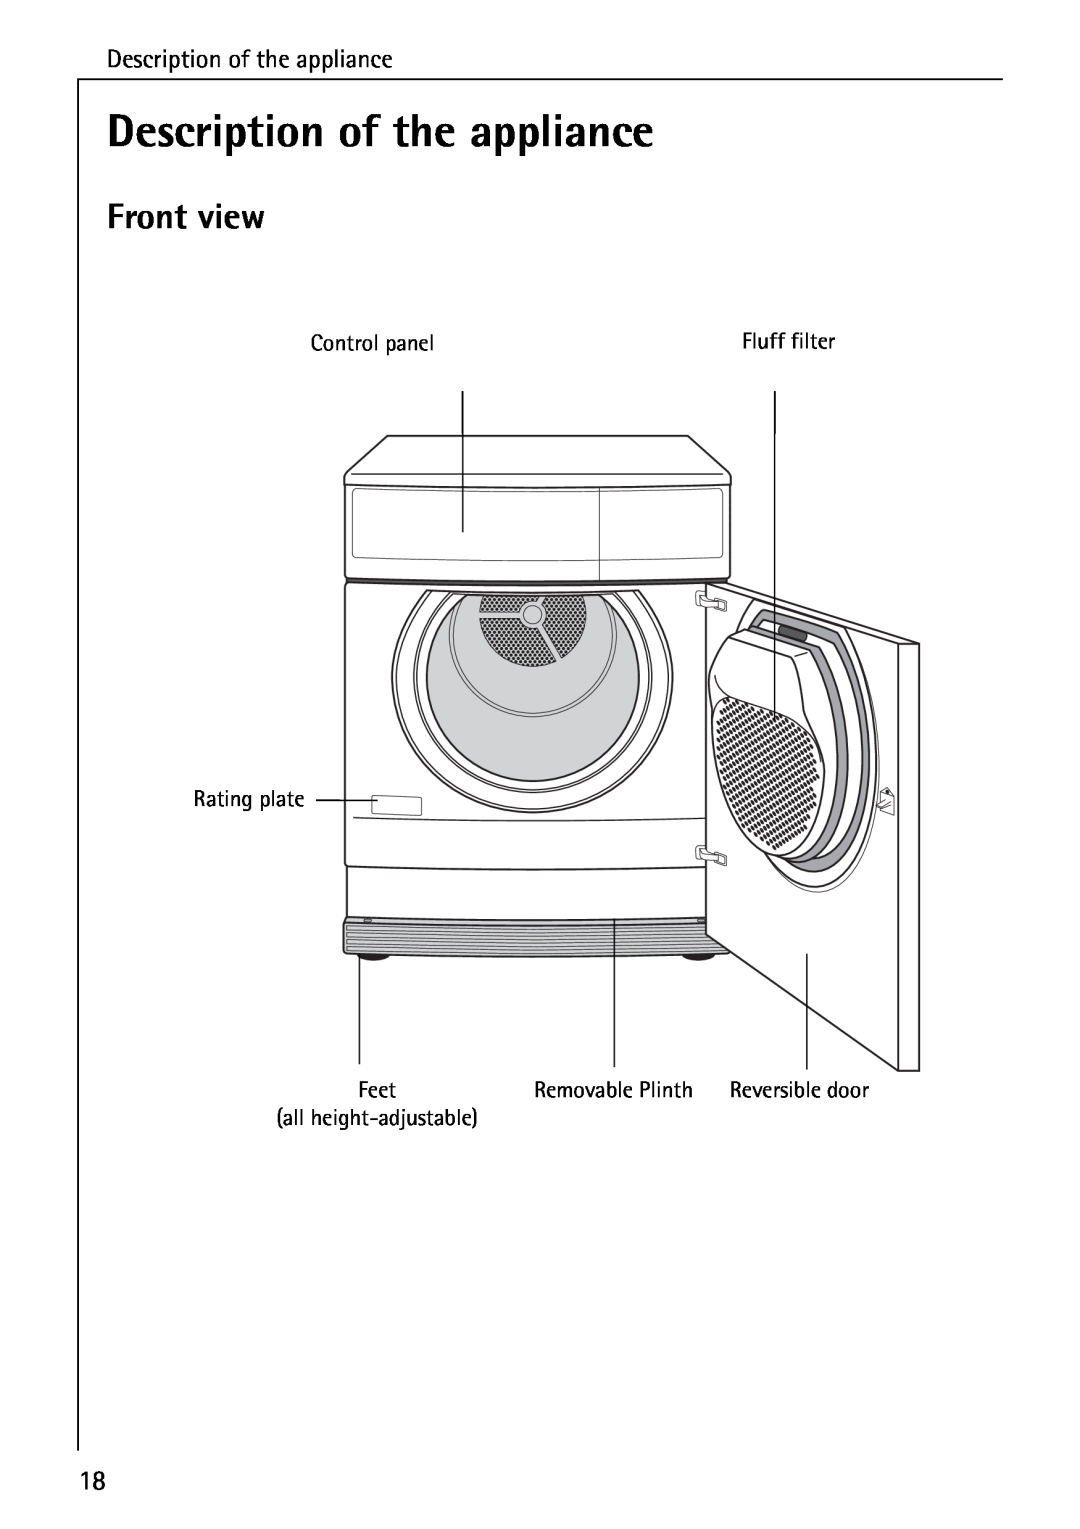 AEG 33600 Description of the appliance, Front view, Fluff filter, all height-adjustable, Reversible door 